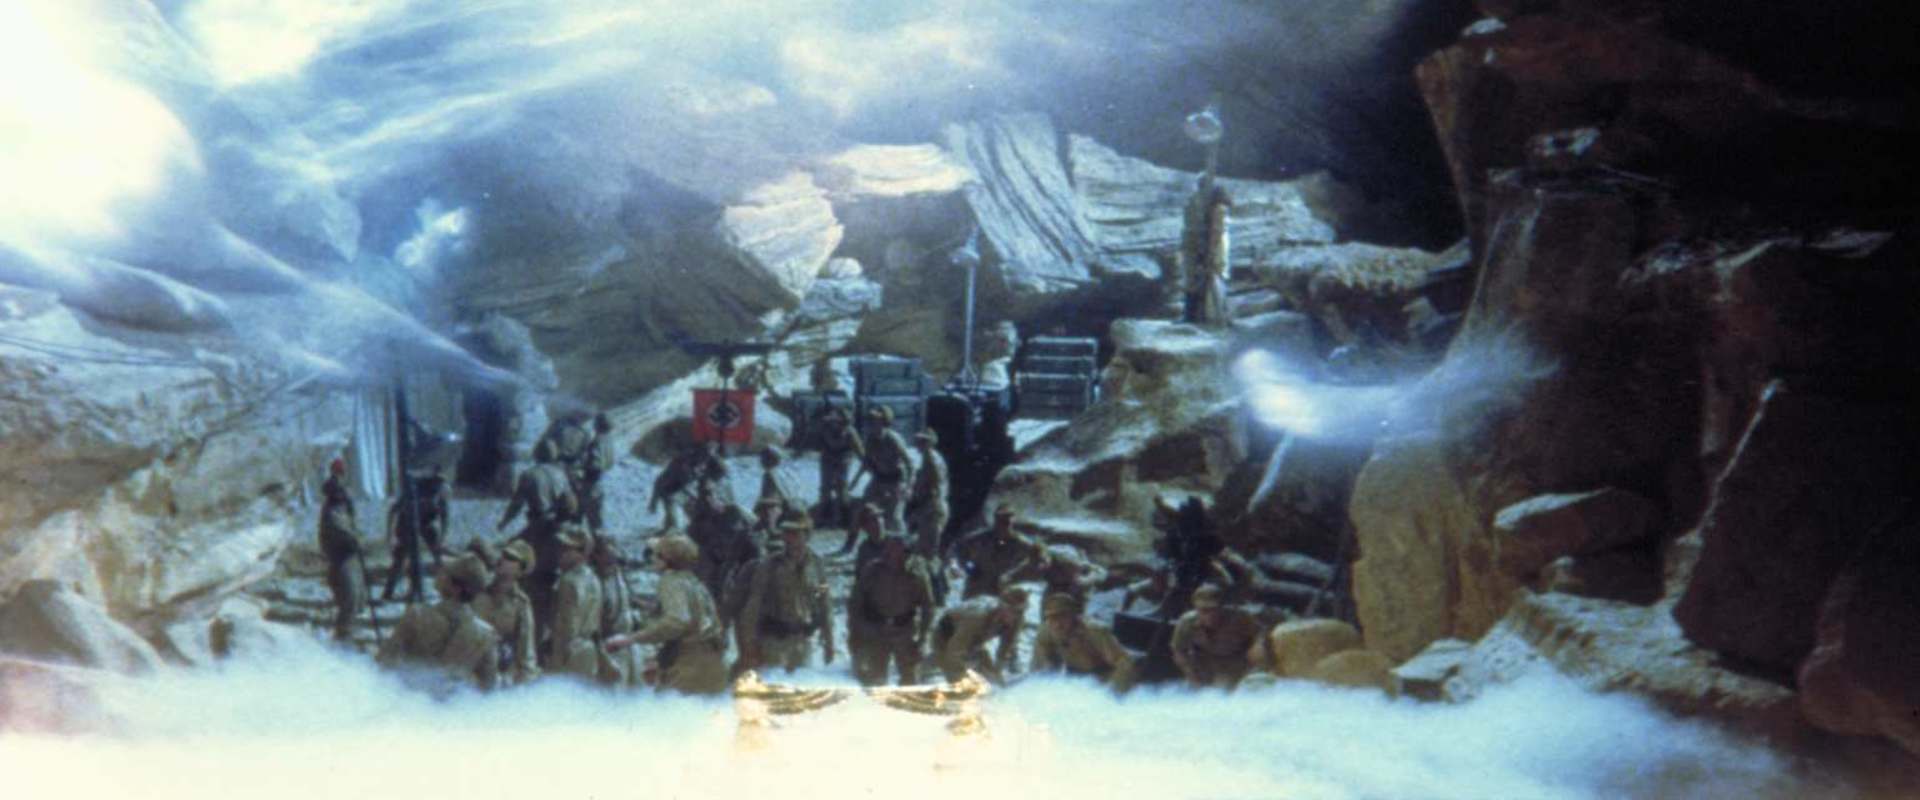 Raiders of the Lost Ark background 1